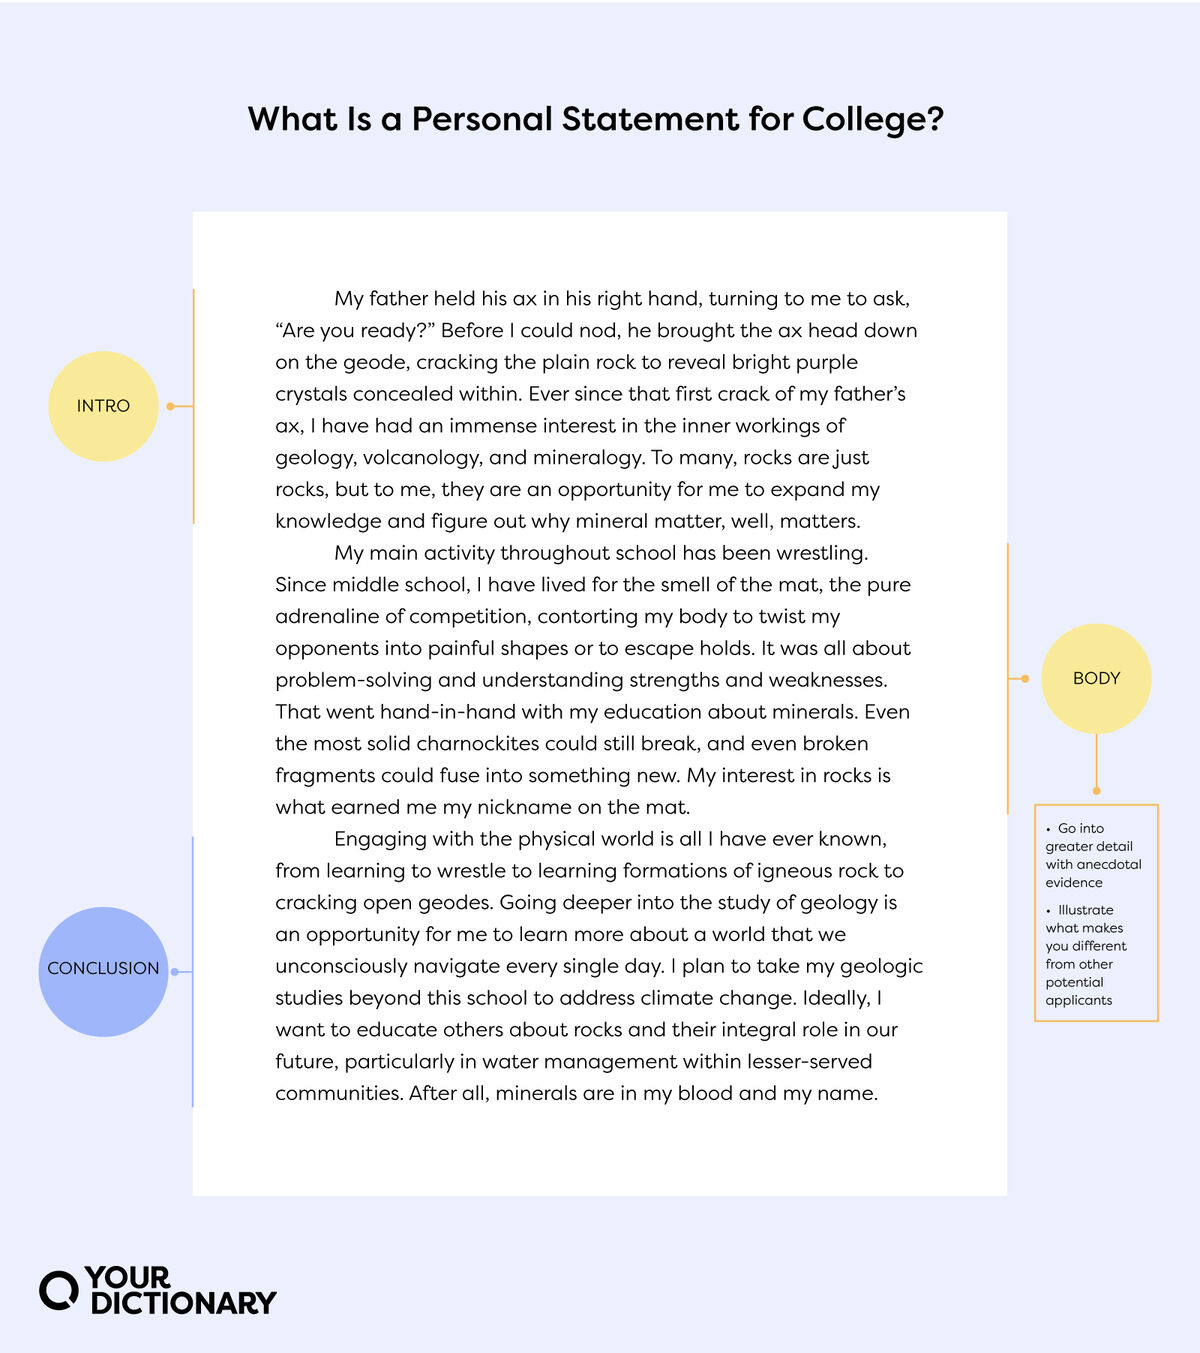 is a personal statement for college